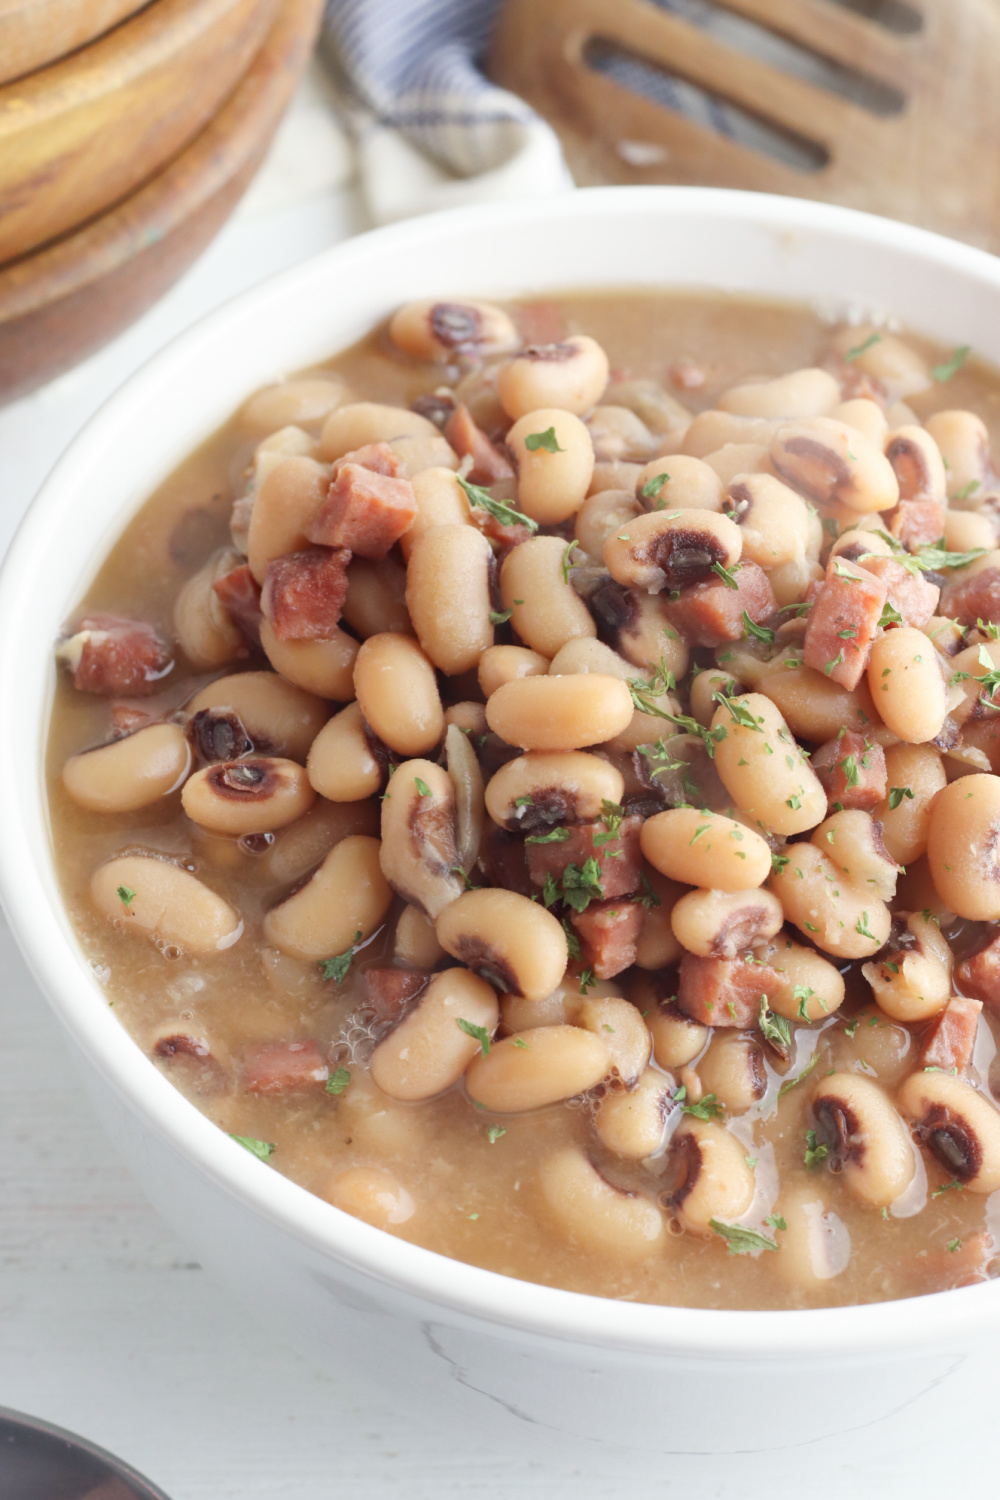 Cooking Black Eyed Peas In a Slow Cooker is an easy way to have this classic dish.